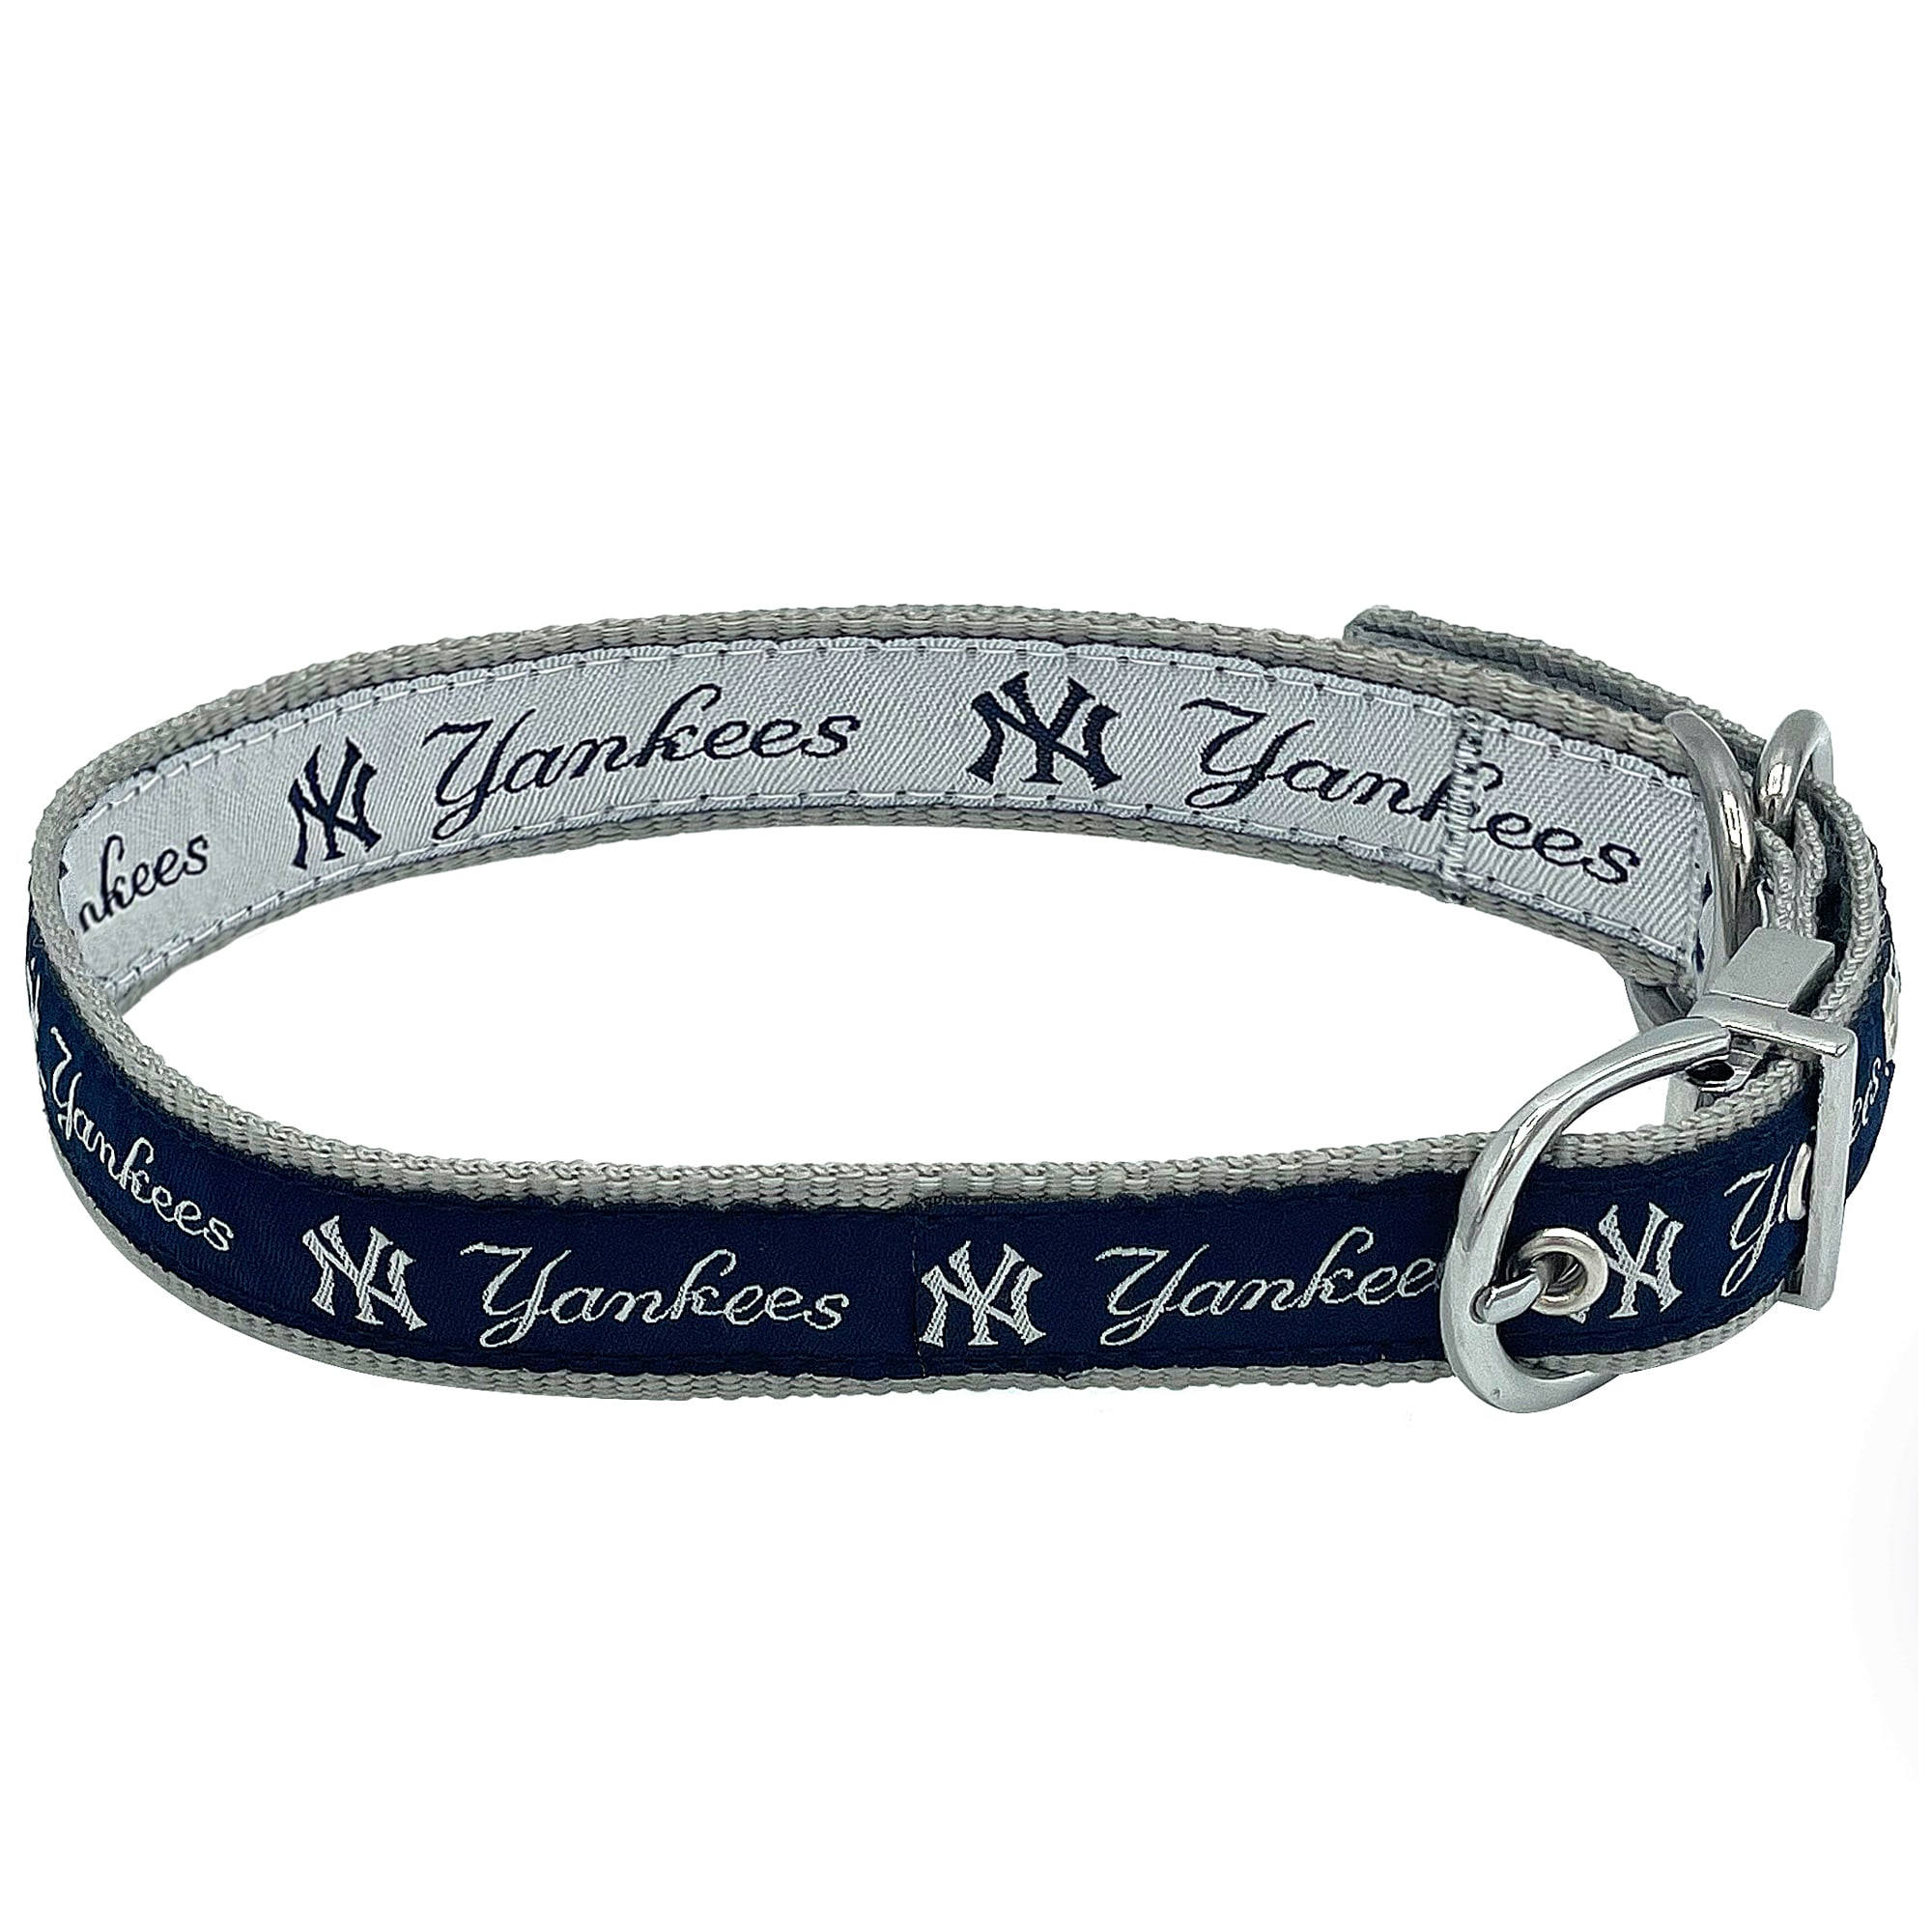 Official New York Yankees Pet Gear, Yankees Collars, Leashes, Chew Toys